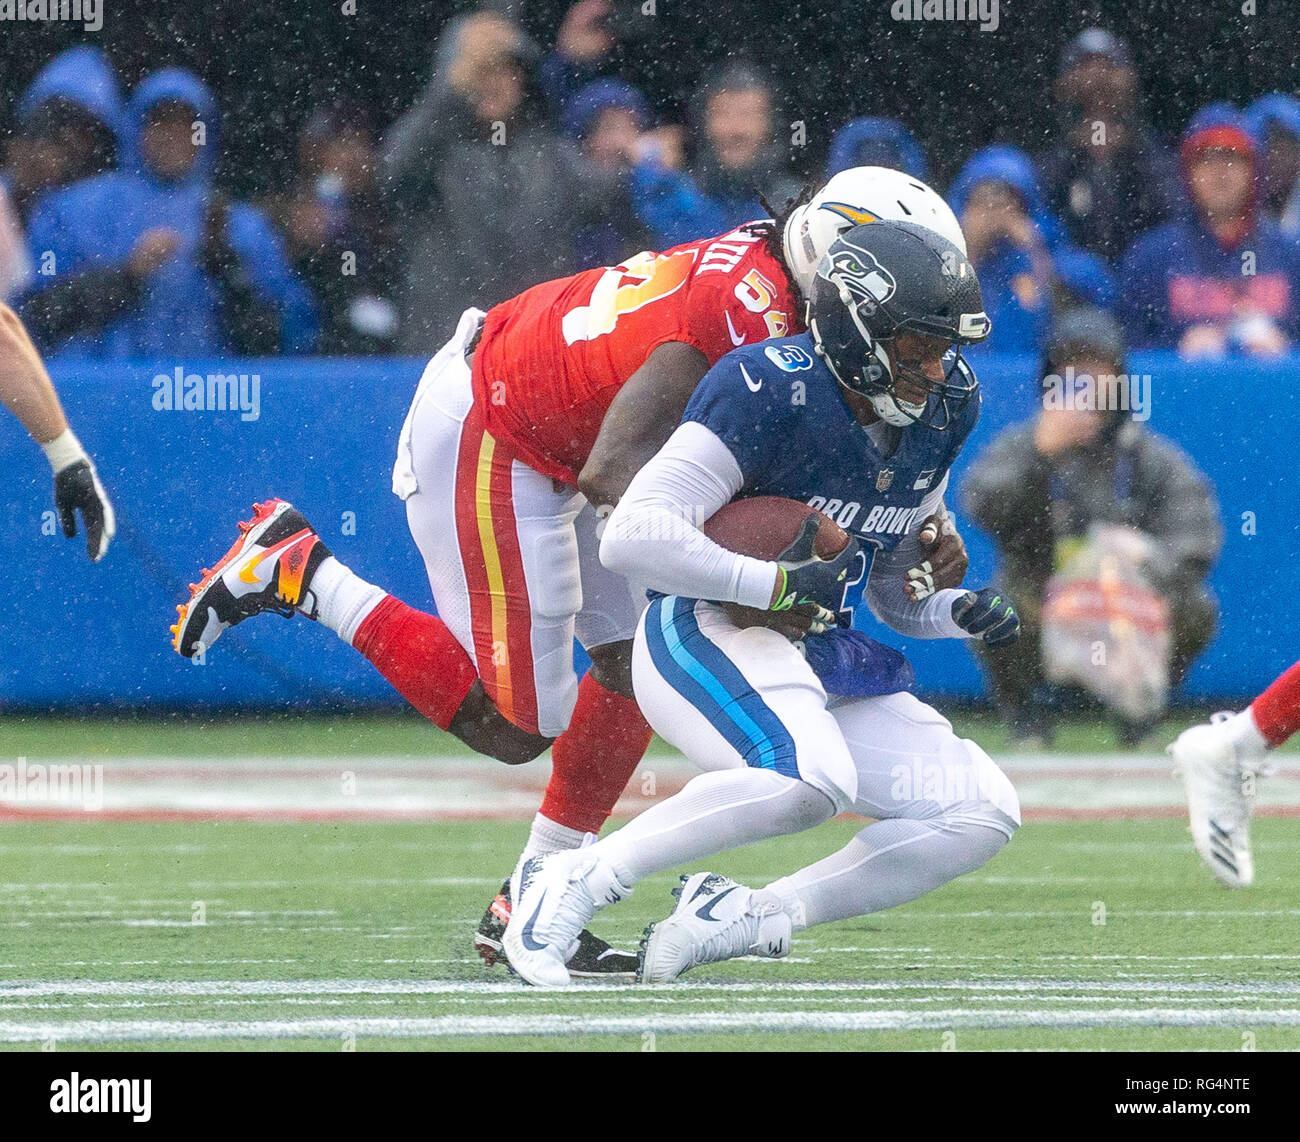 https://c8.alamy.com/comp/RG4NTE/orlando-florida-usa-27th-jan-2019-afc-defensive-end-melvin-ingram-54-of-the-los-angeles-chargers-sacks-nfc-quarterback-russell-wilson-3-of-the-seattle-seahawks-in-the-1st-quarter-during-the-nfl-pro-bowl-football-game-between-the-afc-and-the-nfc-at-camping-world-stadium-in-orlando-florida-del-mecumcsmalamy-live-news-RG4NTE.jpg